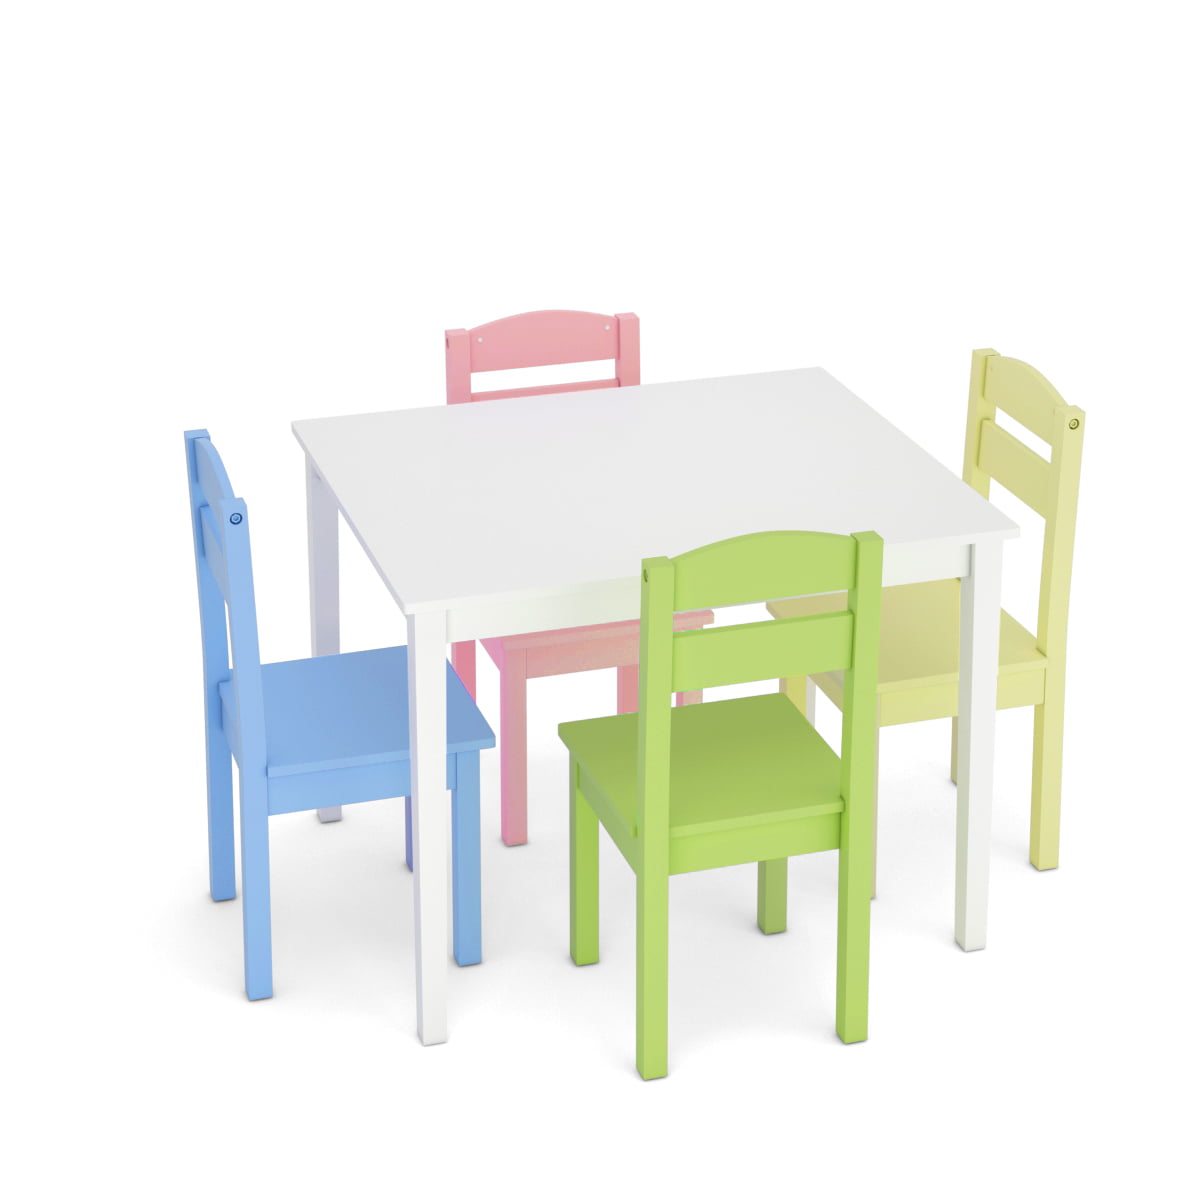 childrens chairs canada